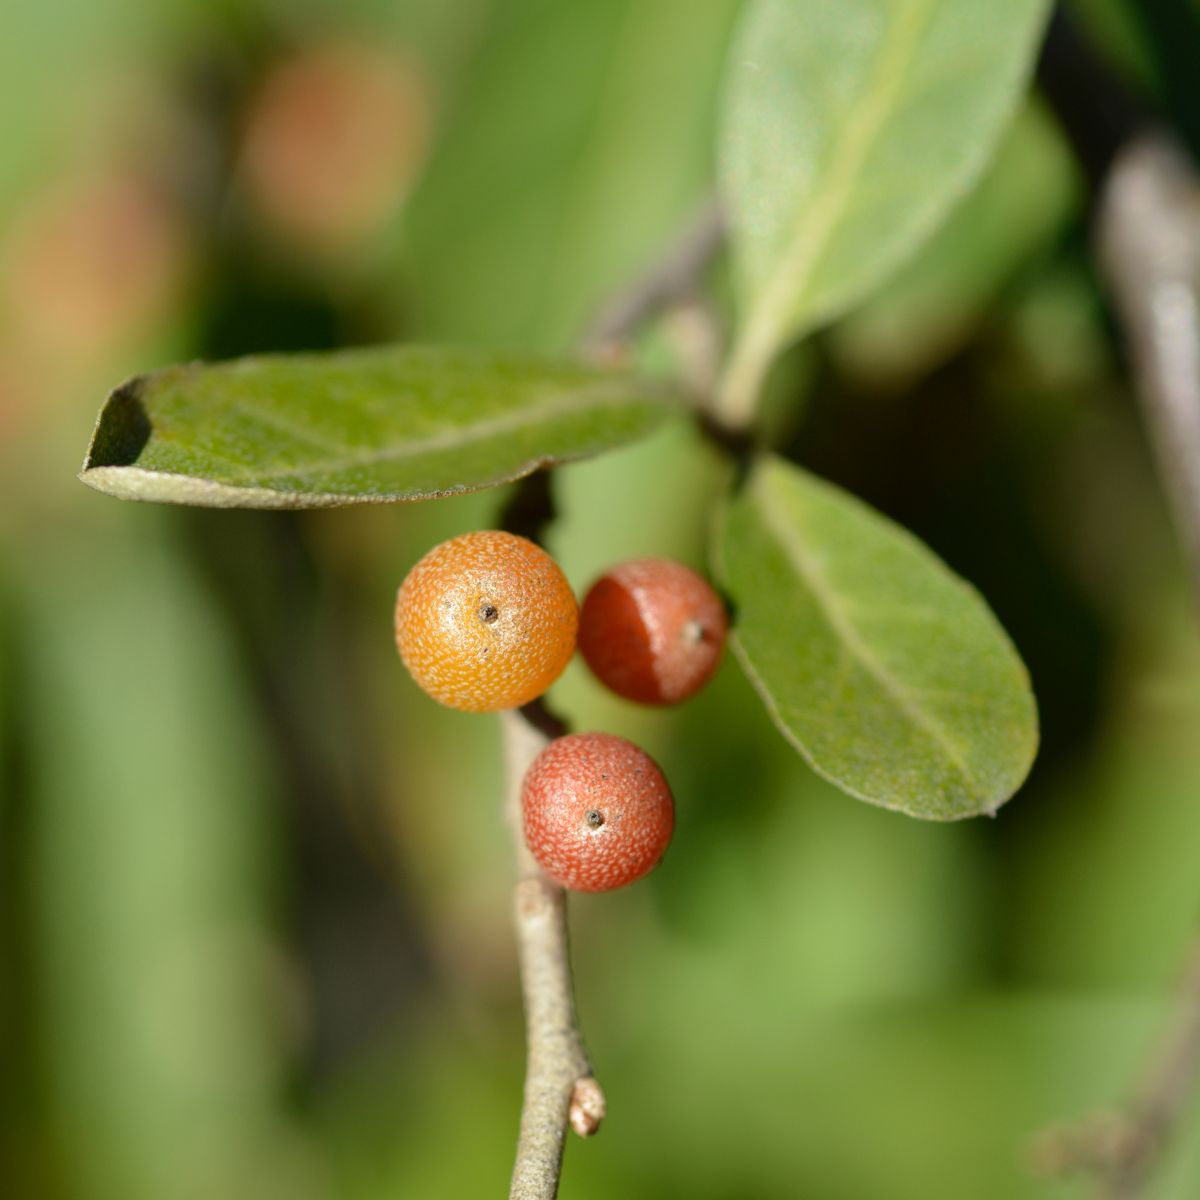 Autumn olive fruit and leaves